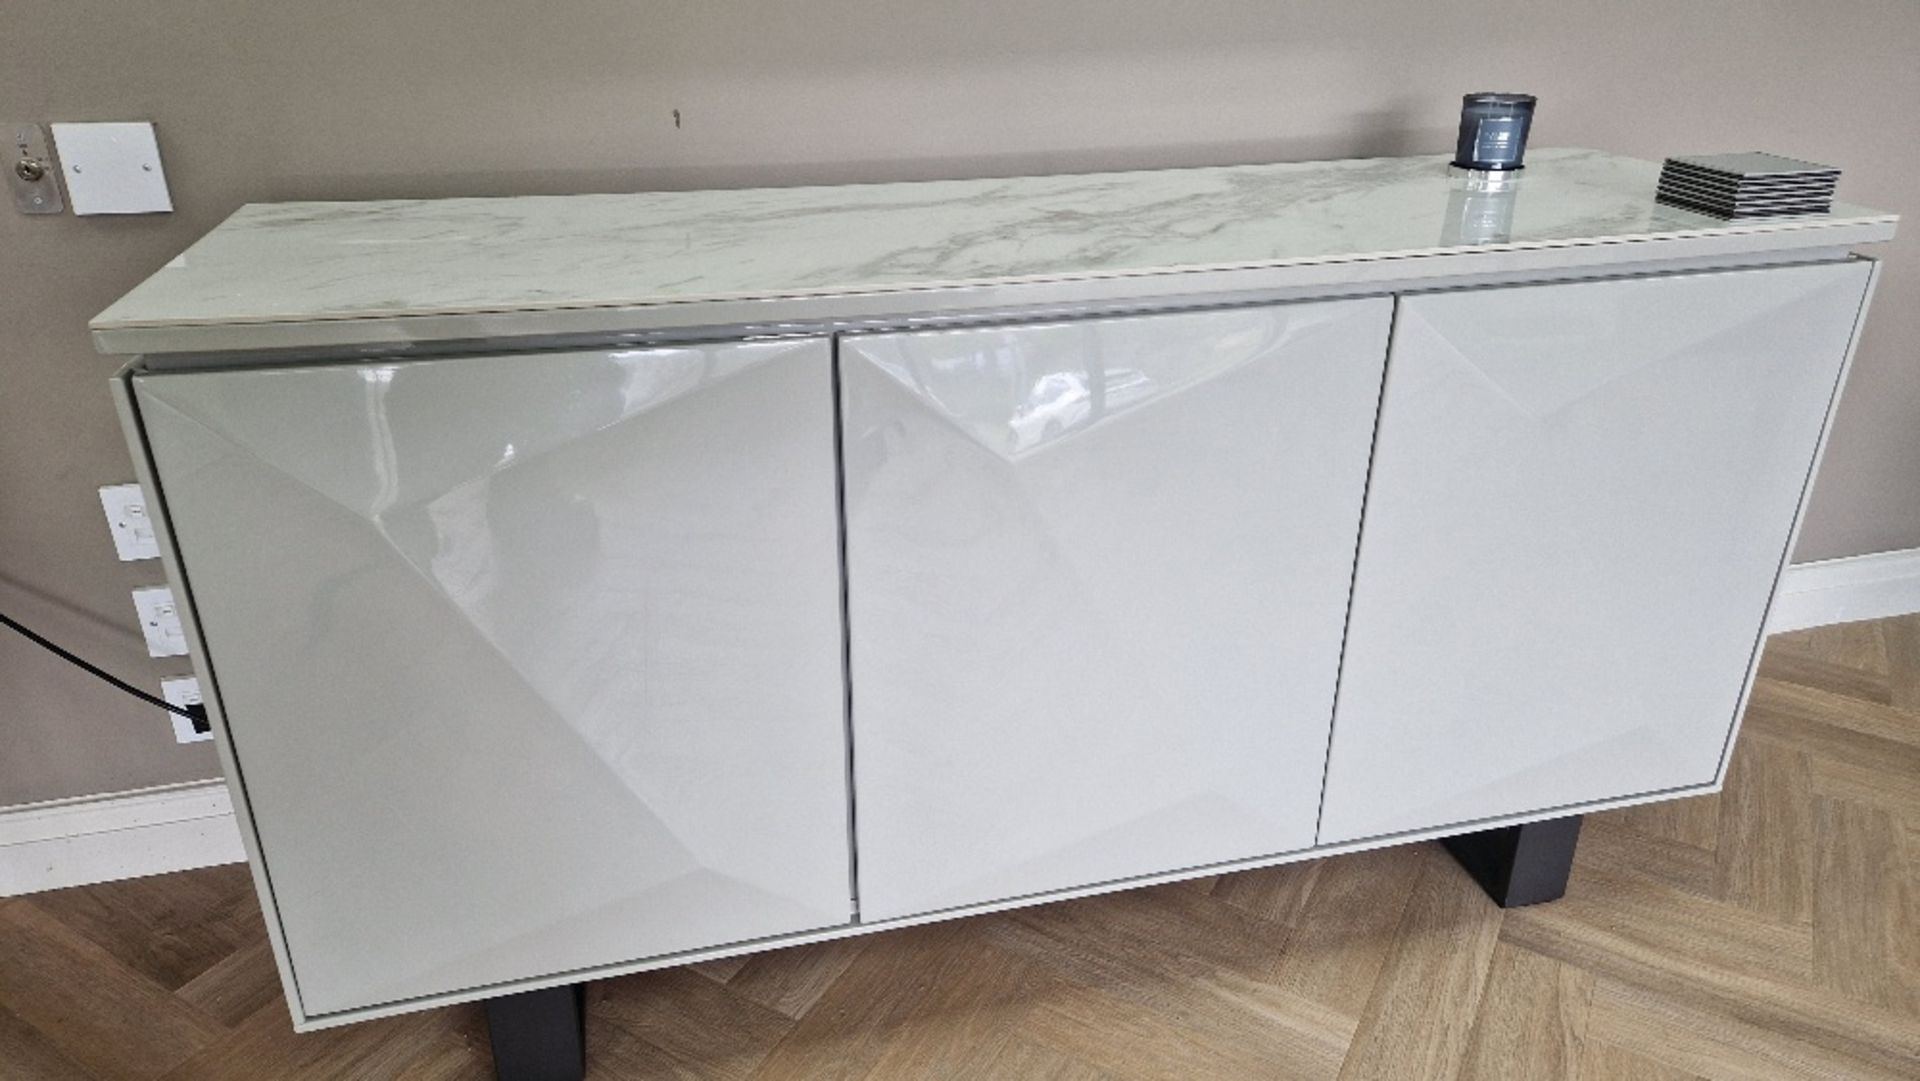 GLOSS GREY THREE DRAWER SIDE UNIT WITH POLISHED STONE TOP AND PUSH OPEN DOORS. *** PLEASE NOTE: